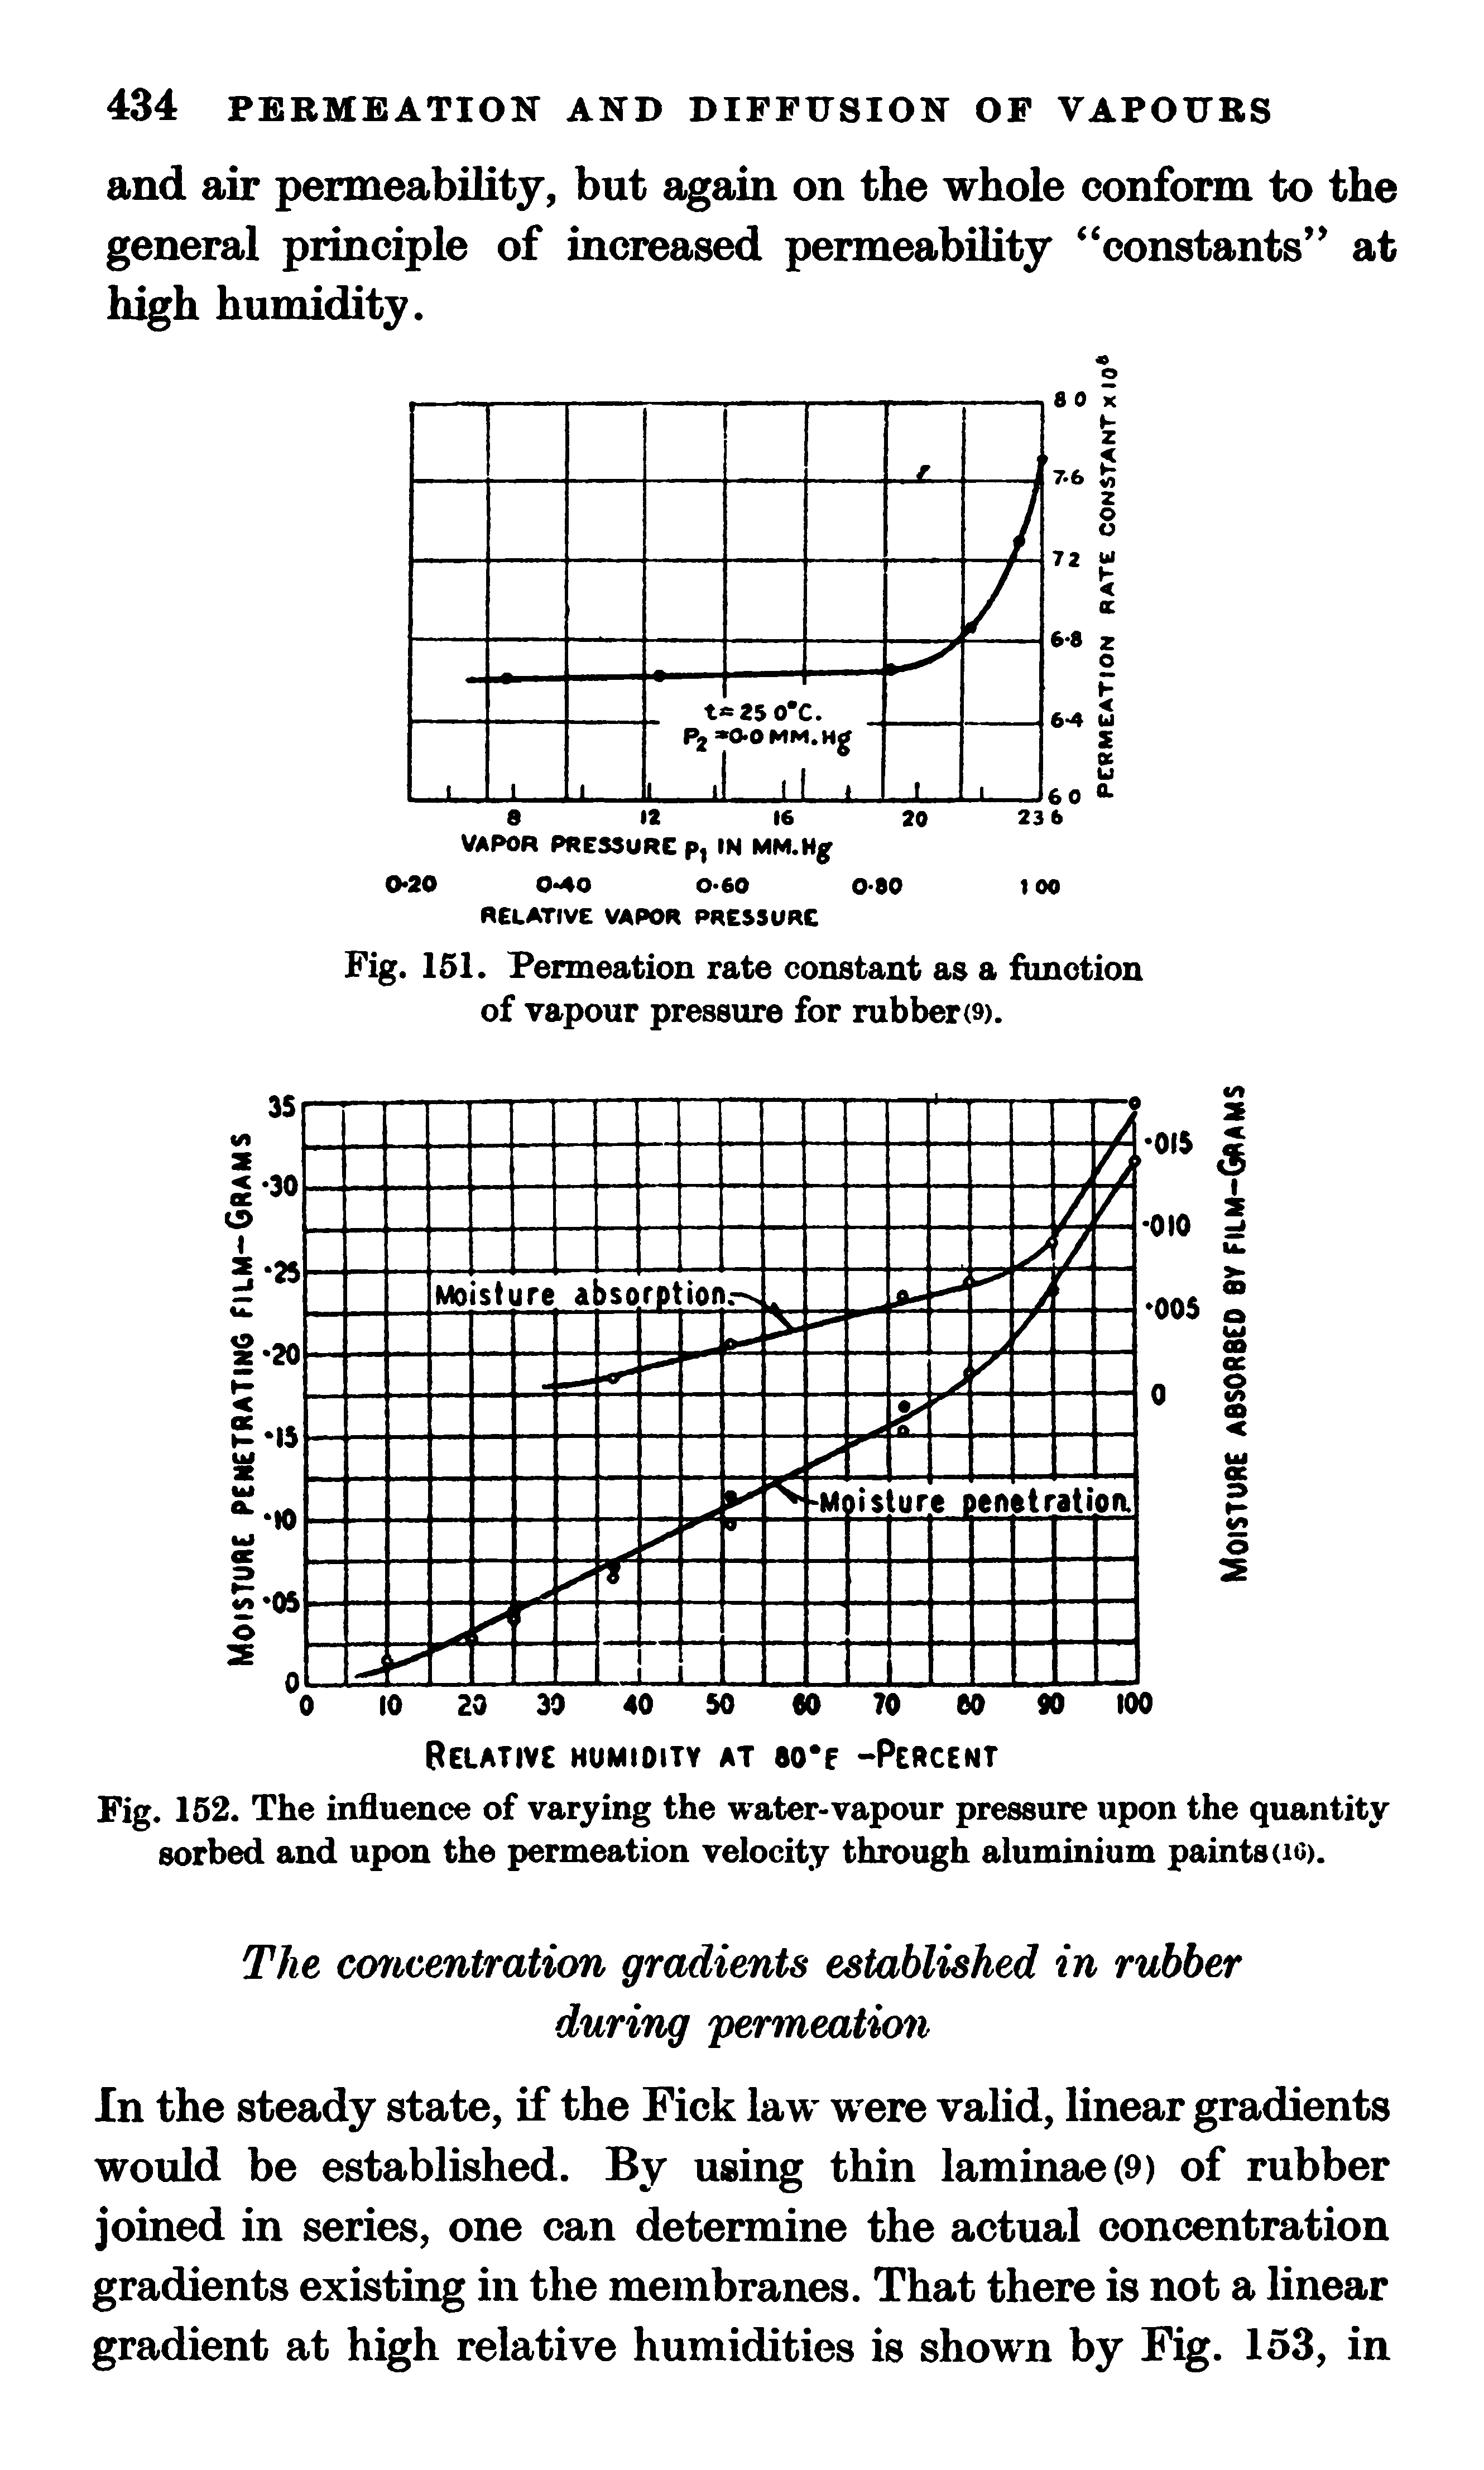 Fig. 152. The influence of varying the water-vapour pressure upon the quantity sorbed and upon the permeation velocity through aluminium paints (lO).